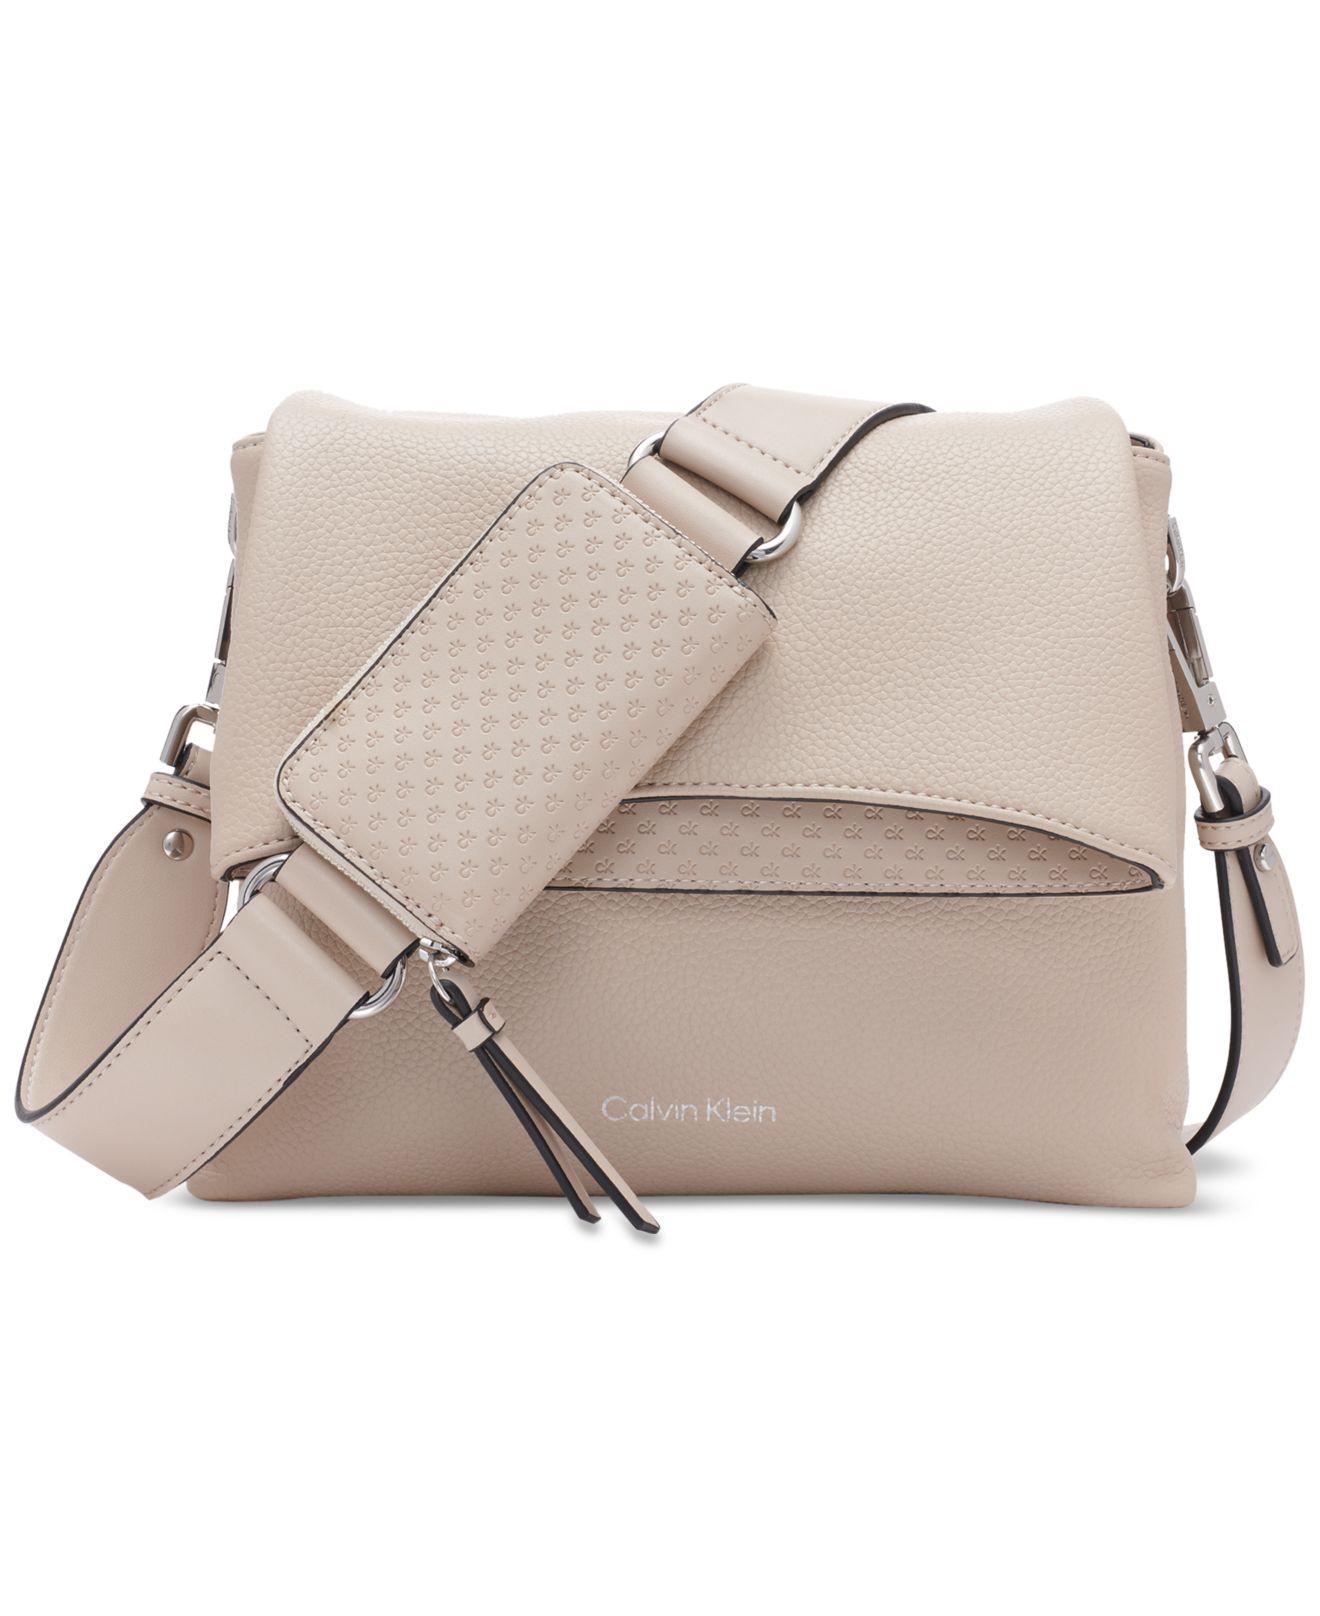 Calvin Klein Chrome Embossed Signature Small Crossbody in Natural | Lyst